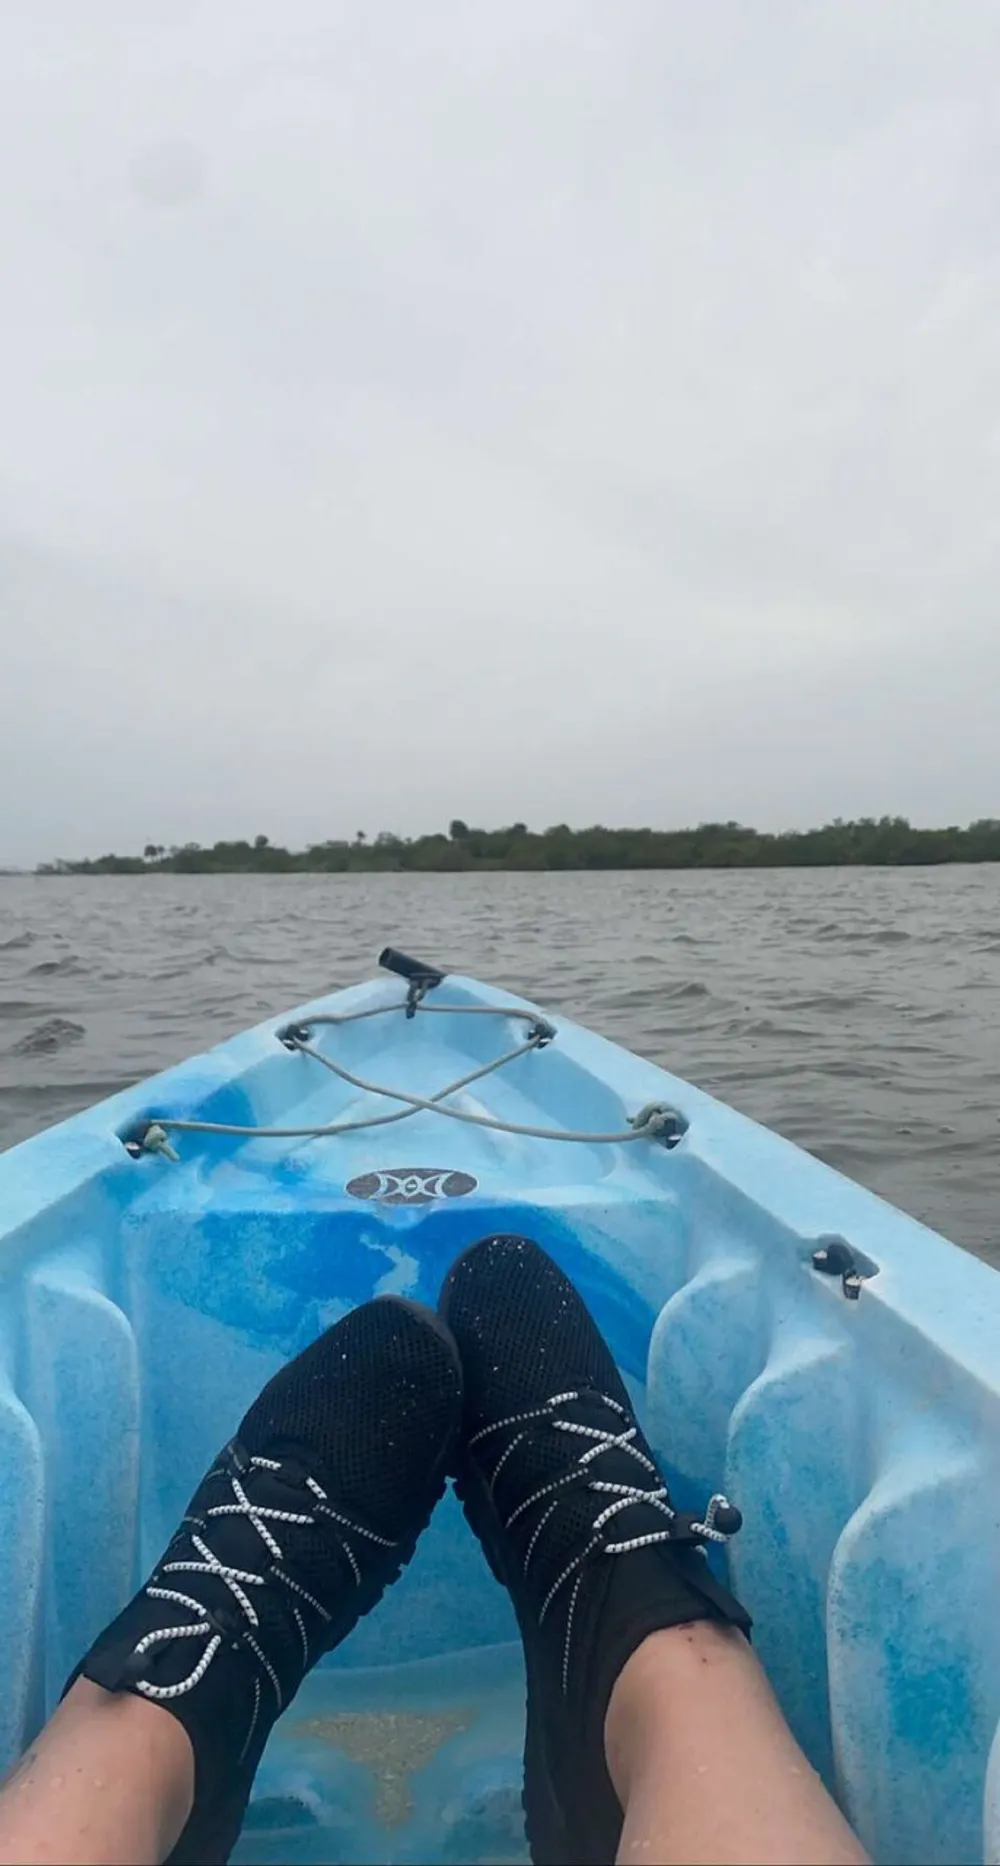 A person wearing water shoes is sitting in a blue kayak on a body of water with an overcast sky above